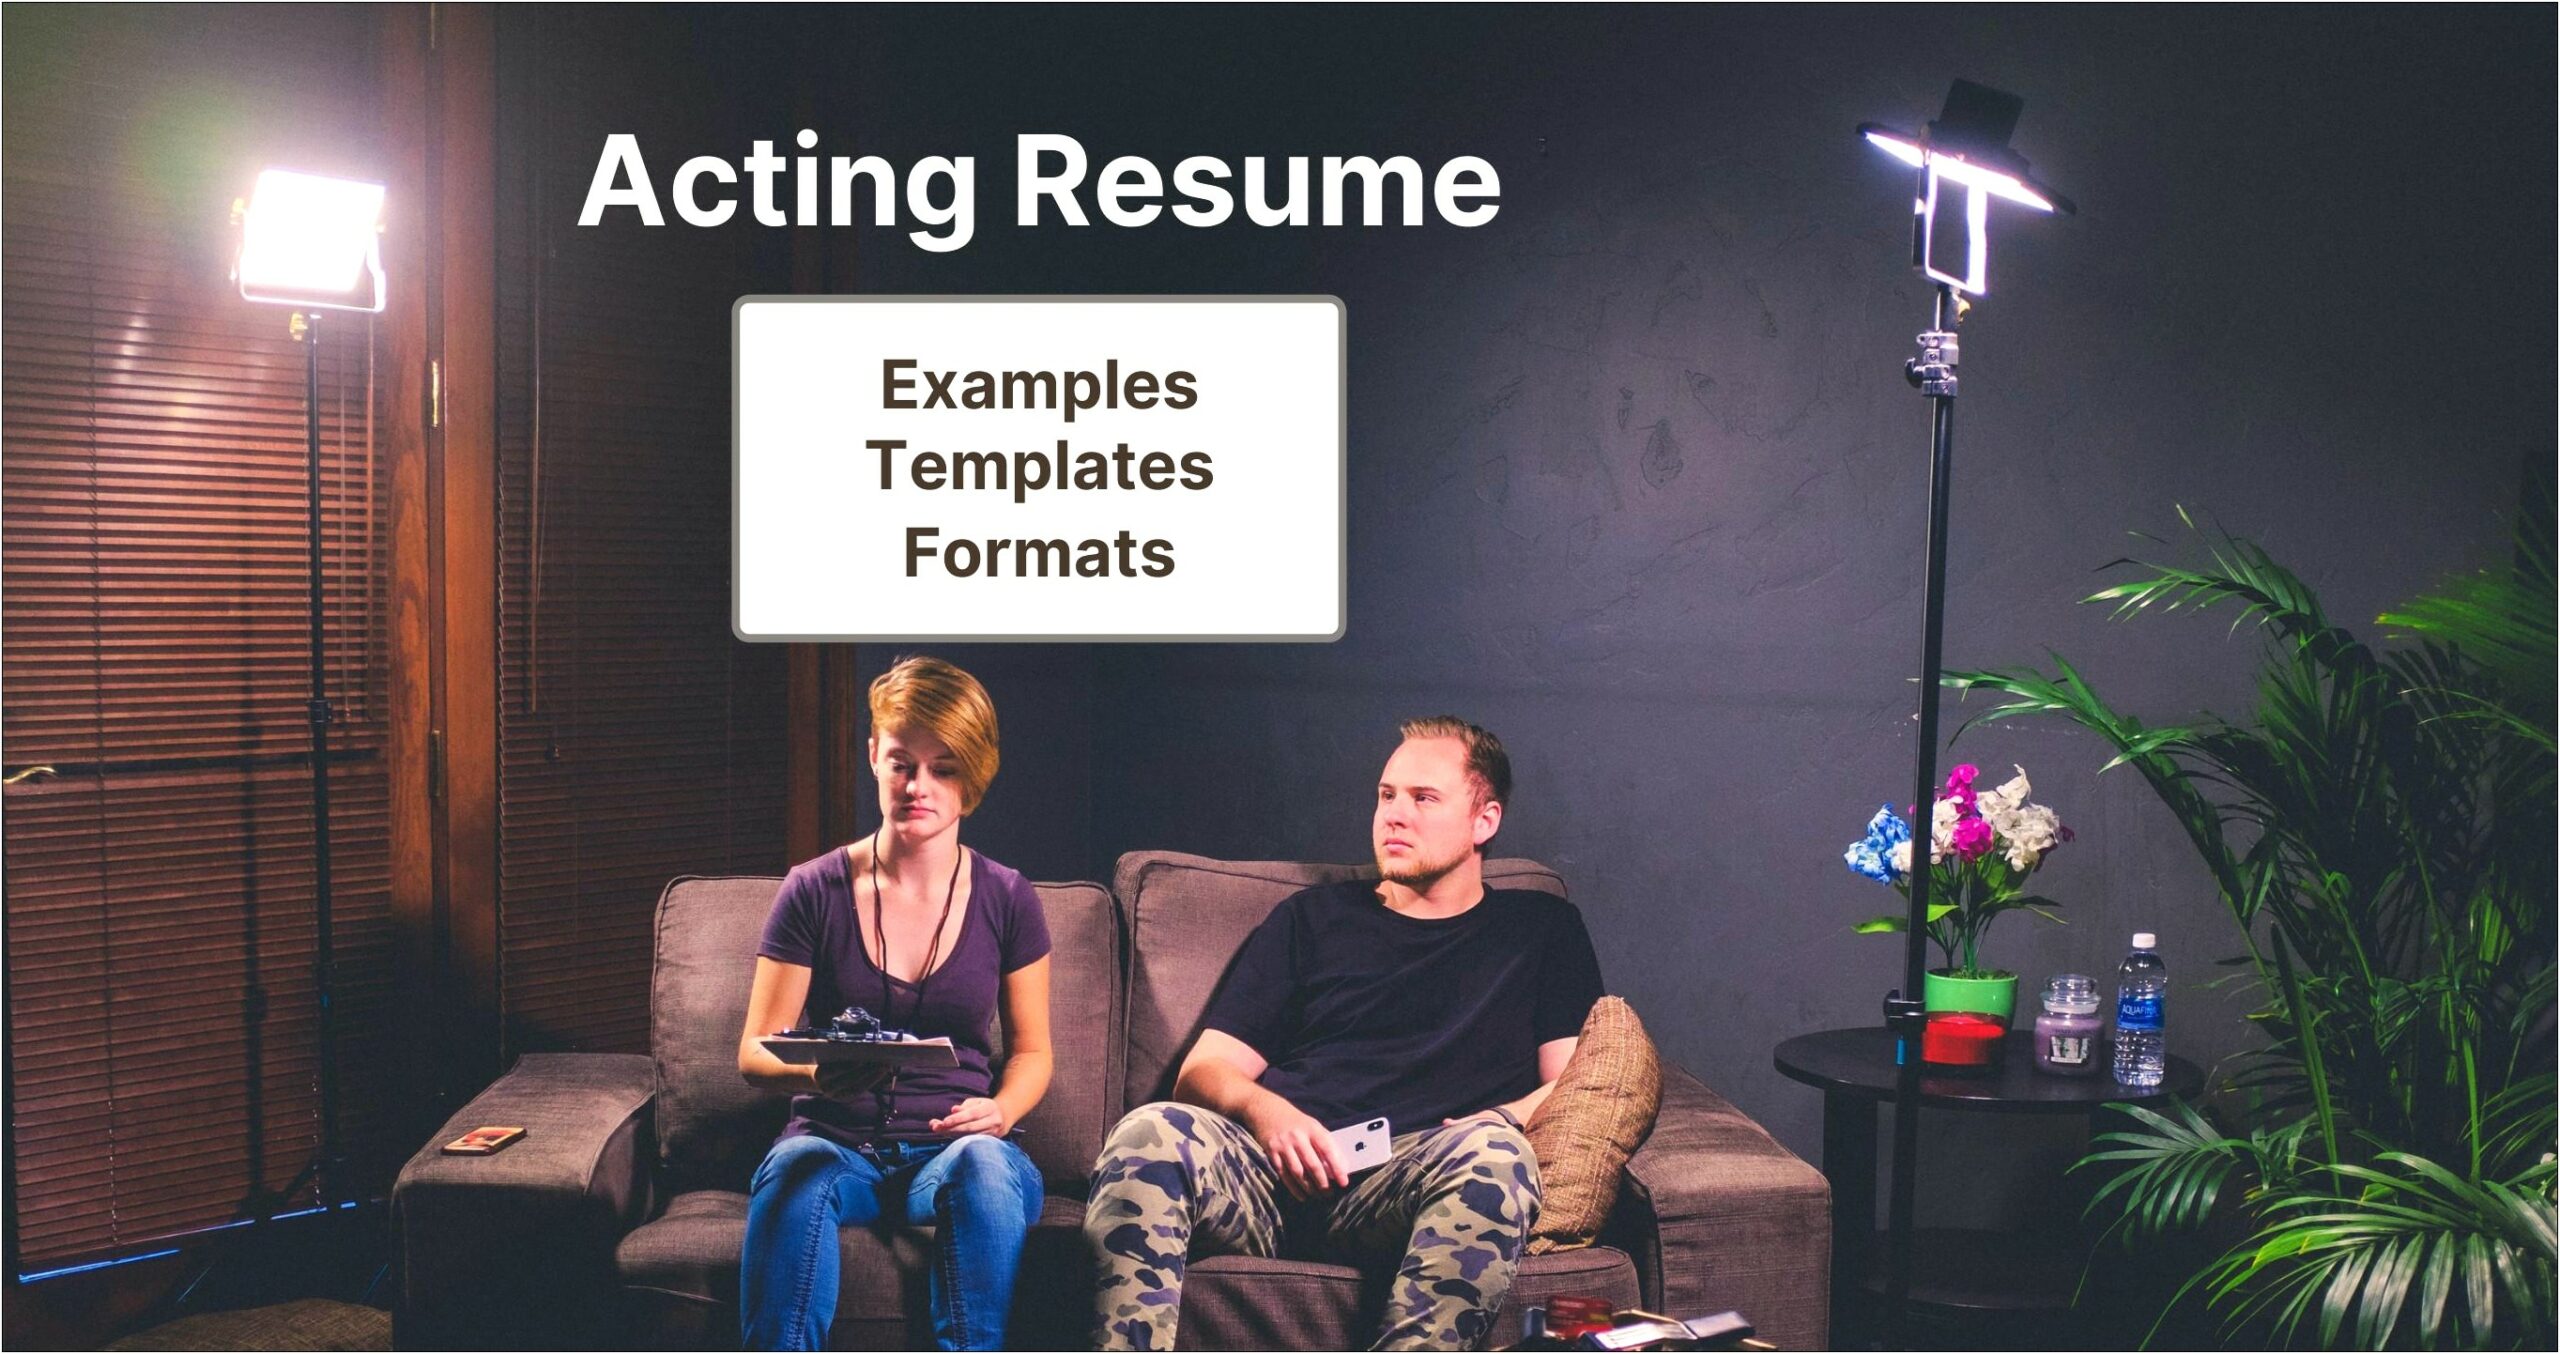 Things That Look Good On An Acting Resume